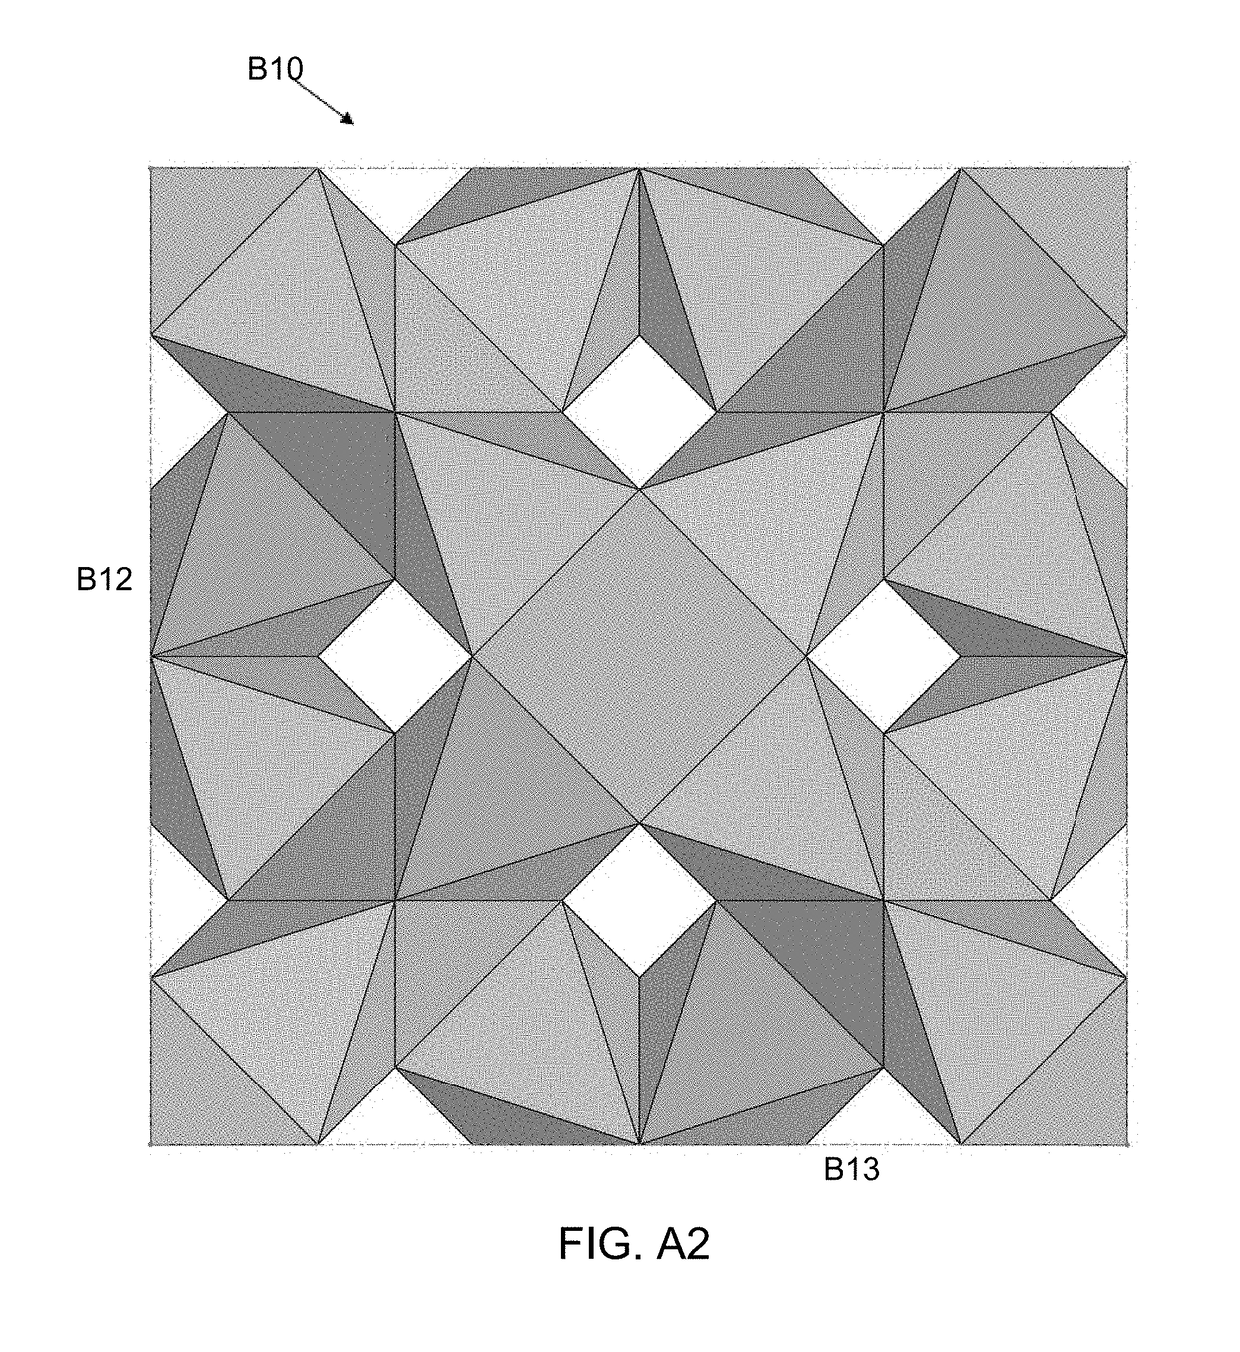 Three-Dimensional Lattice Structures for Implants